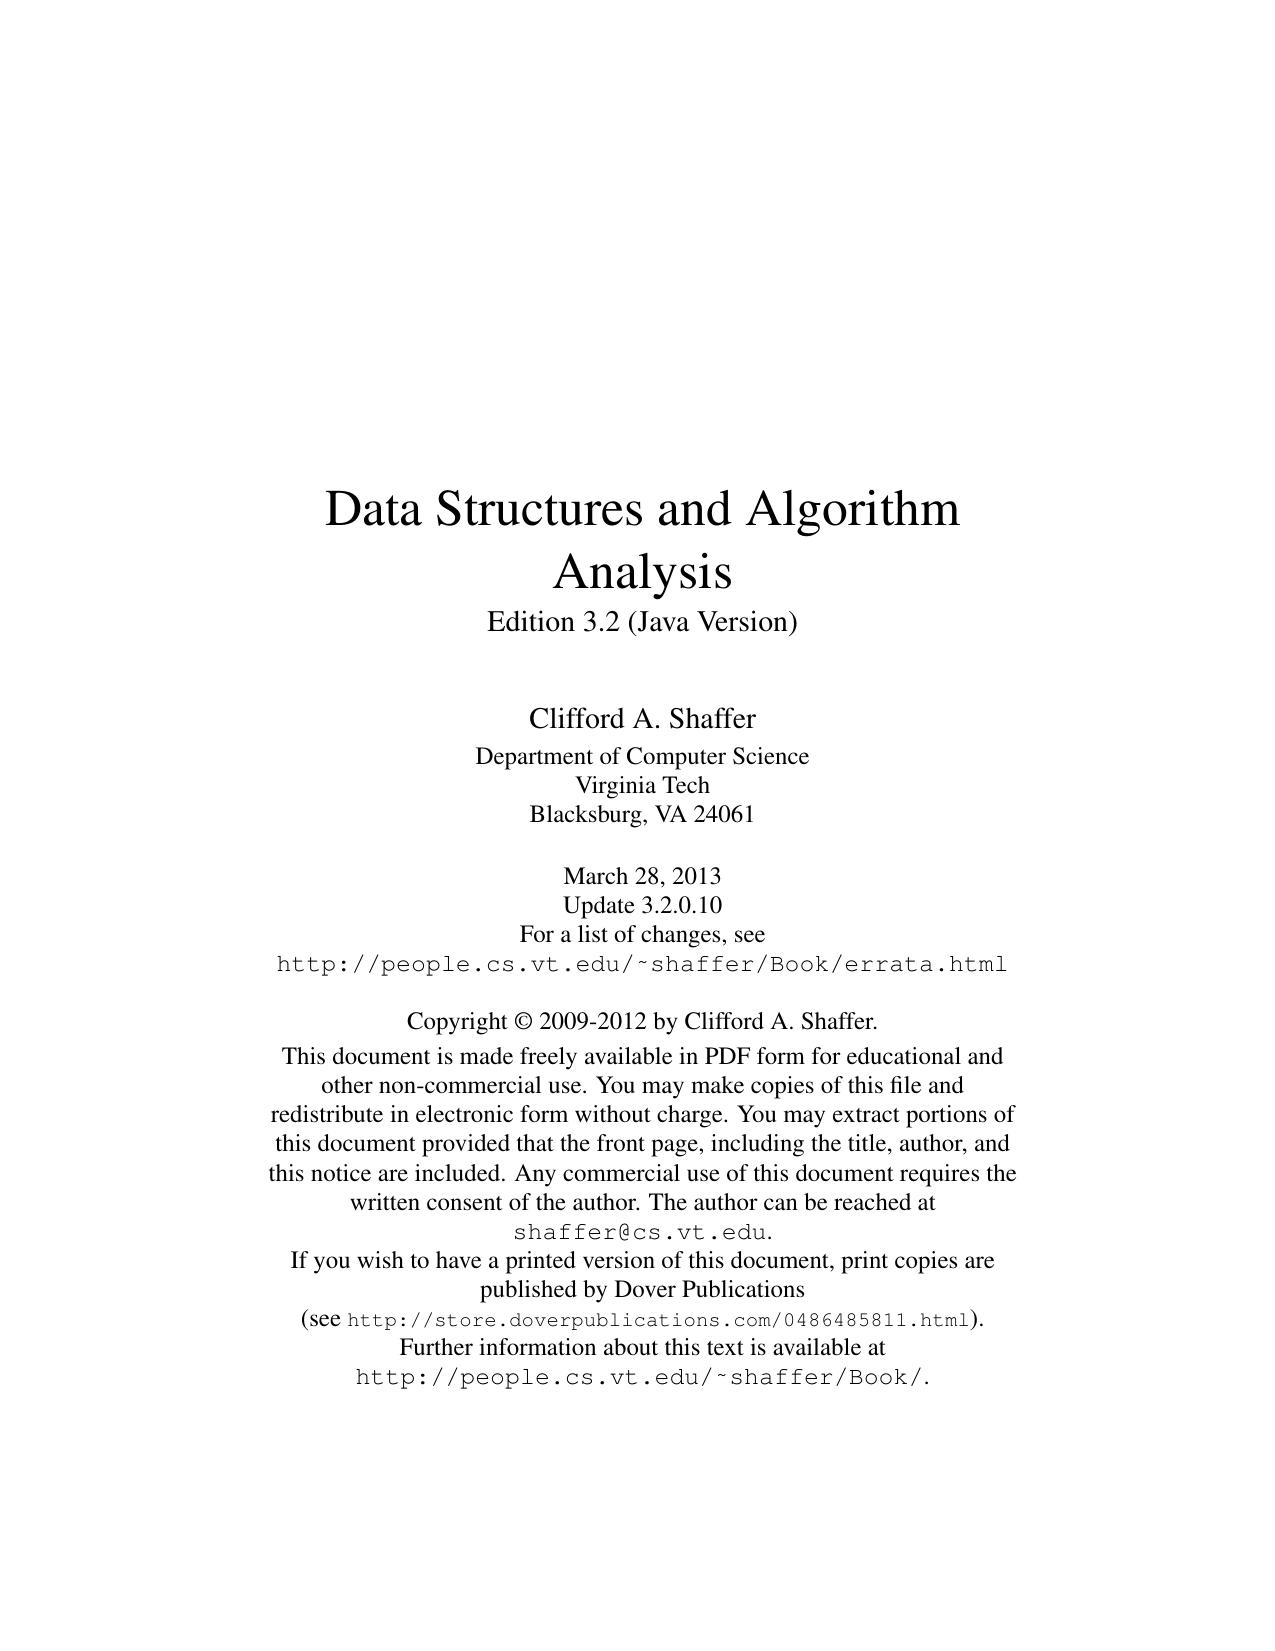 Data Structures and Algorithm Analysis 2013